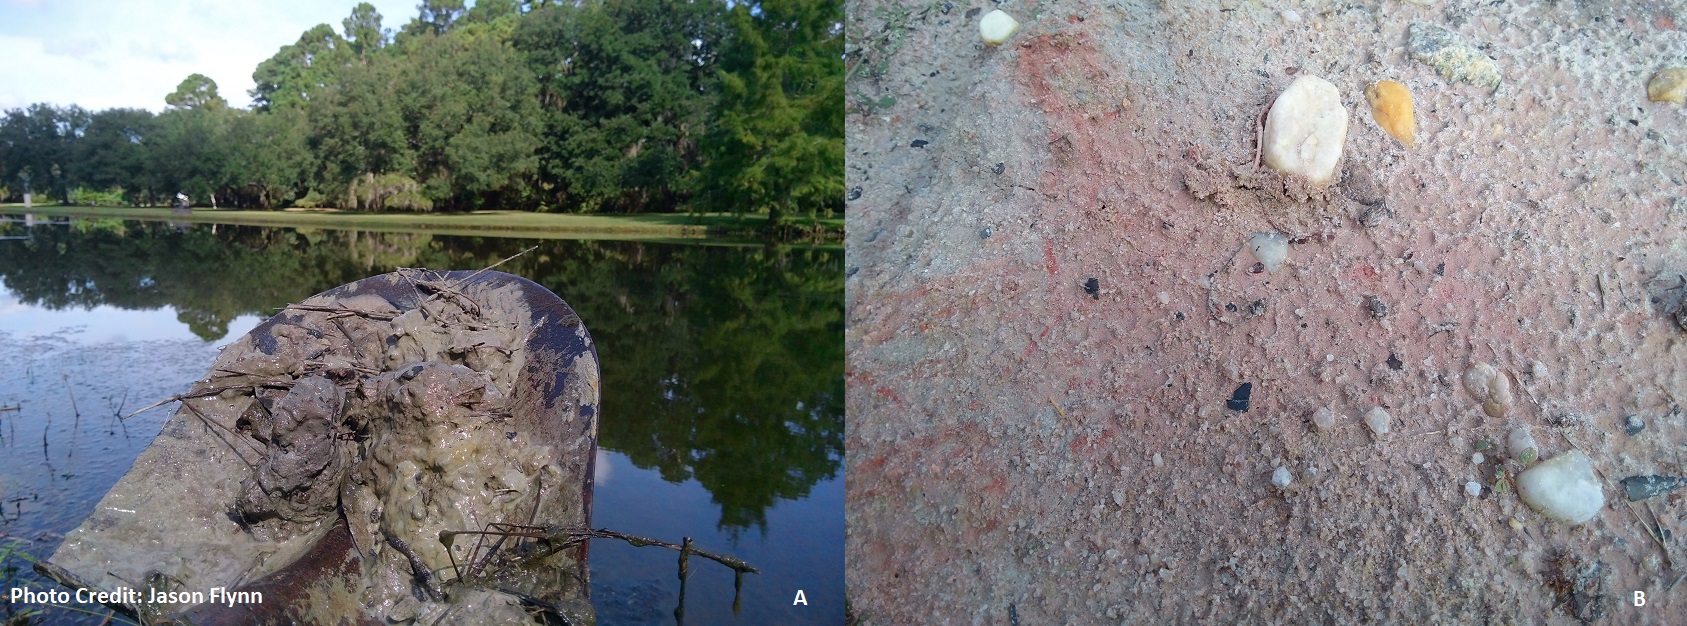 A) Sandy clay loam to clay loam subsoil type from recent Holocene deposits found at the base of the Jessamine Pond at Brookgreen Gardens near the Camellia Walk and Holliday Cottage. B) Middle Coastal Plain subsoil with citronelle gravels intermixed